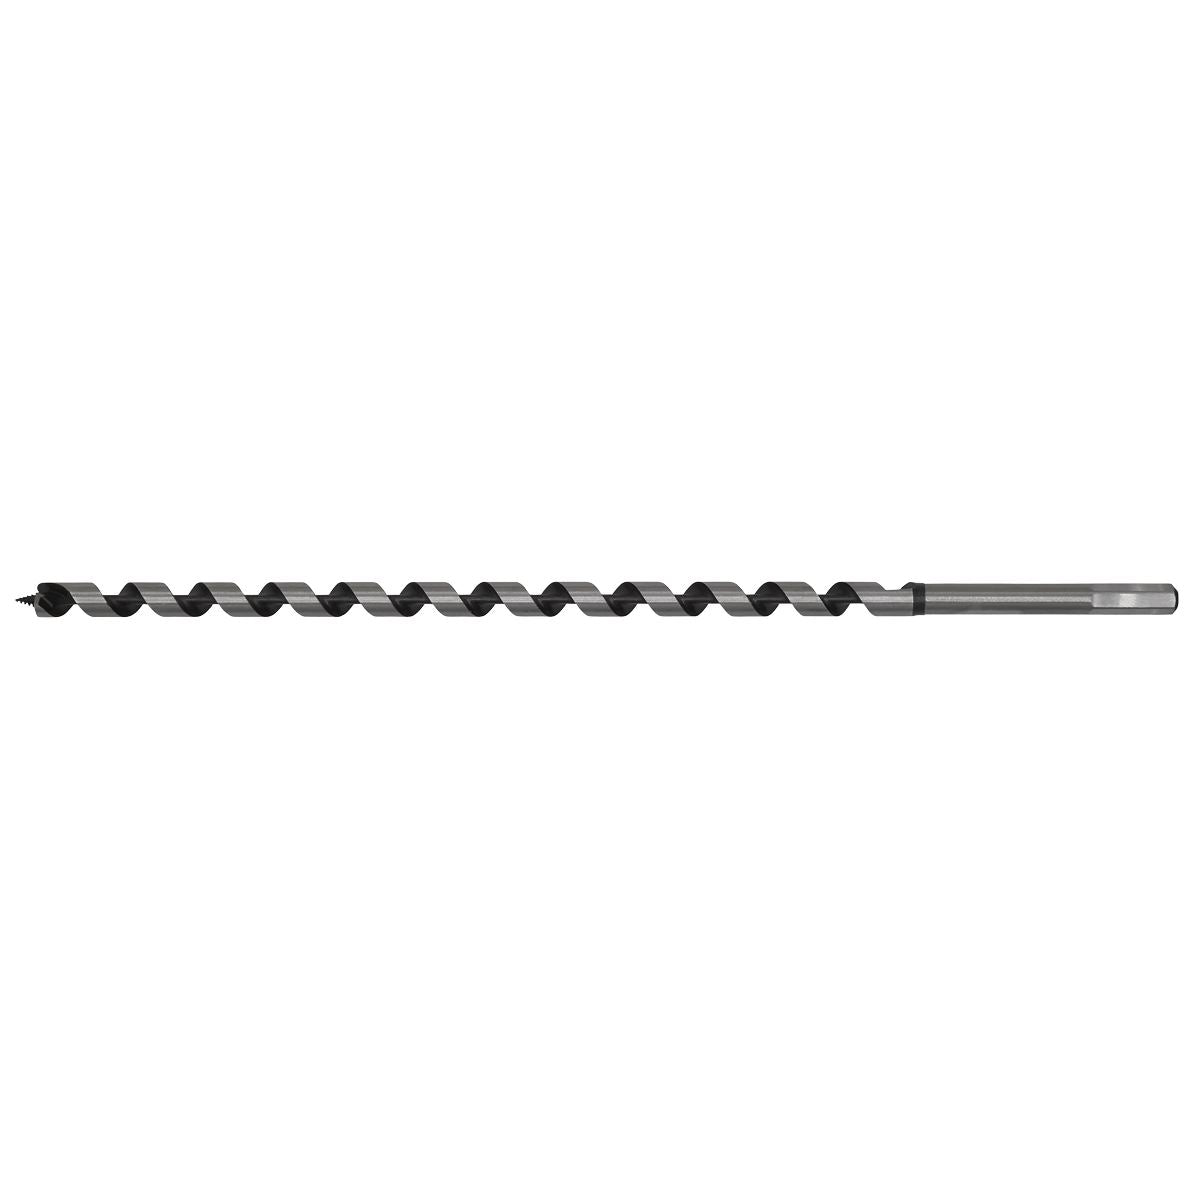 Worksafe by Sealey Auger Wood Drill Bit 14mm x 460mm